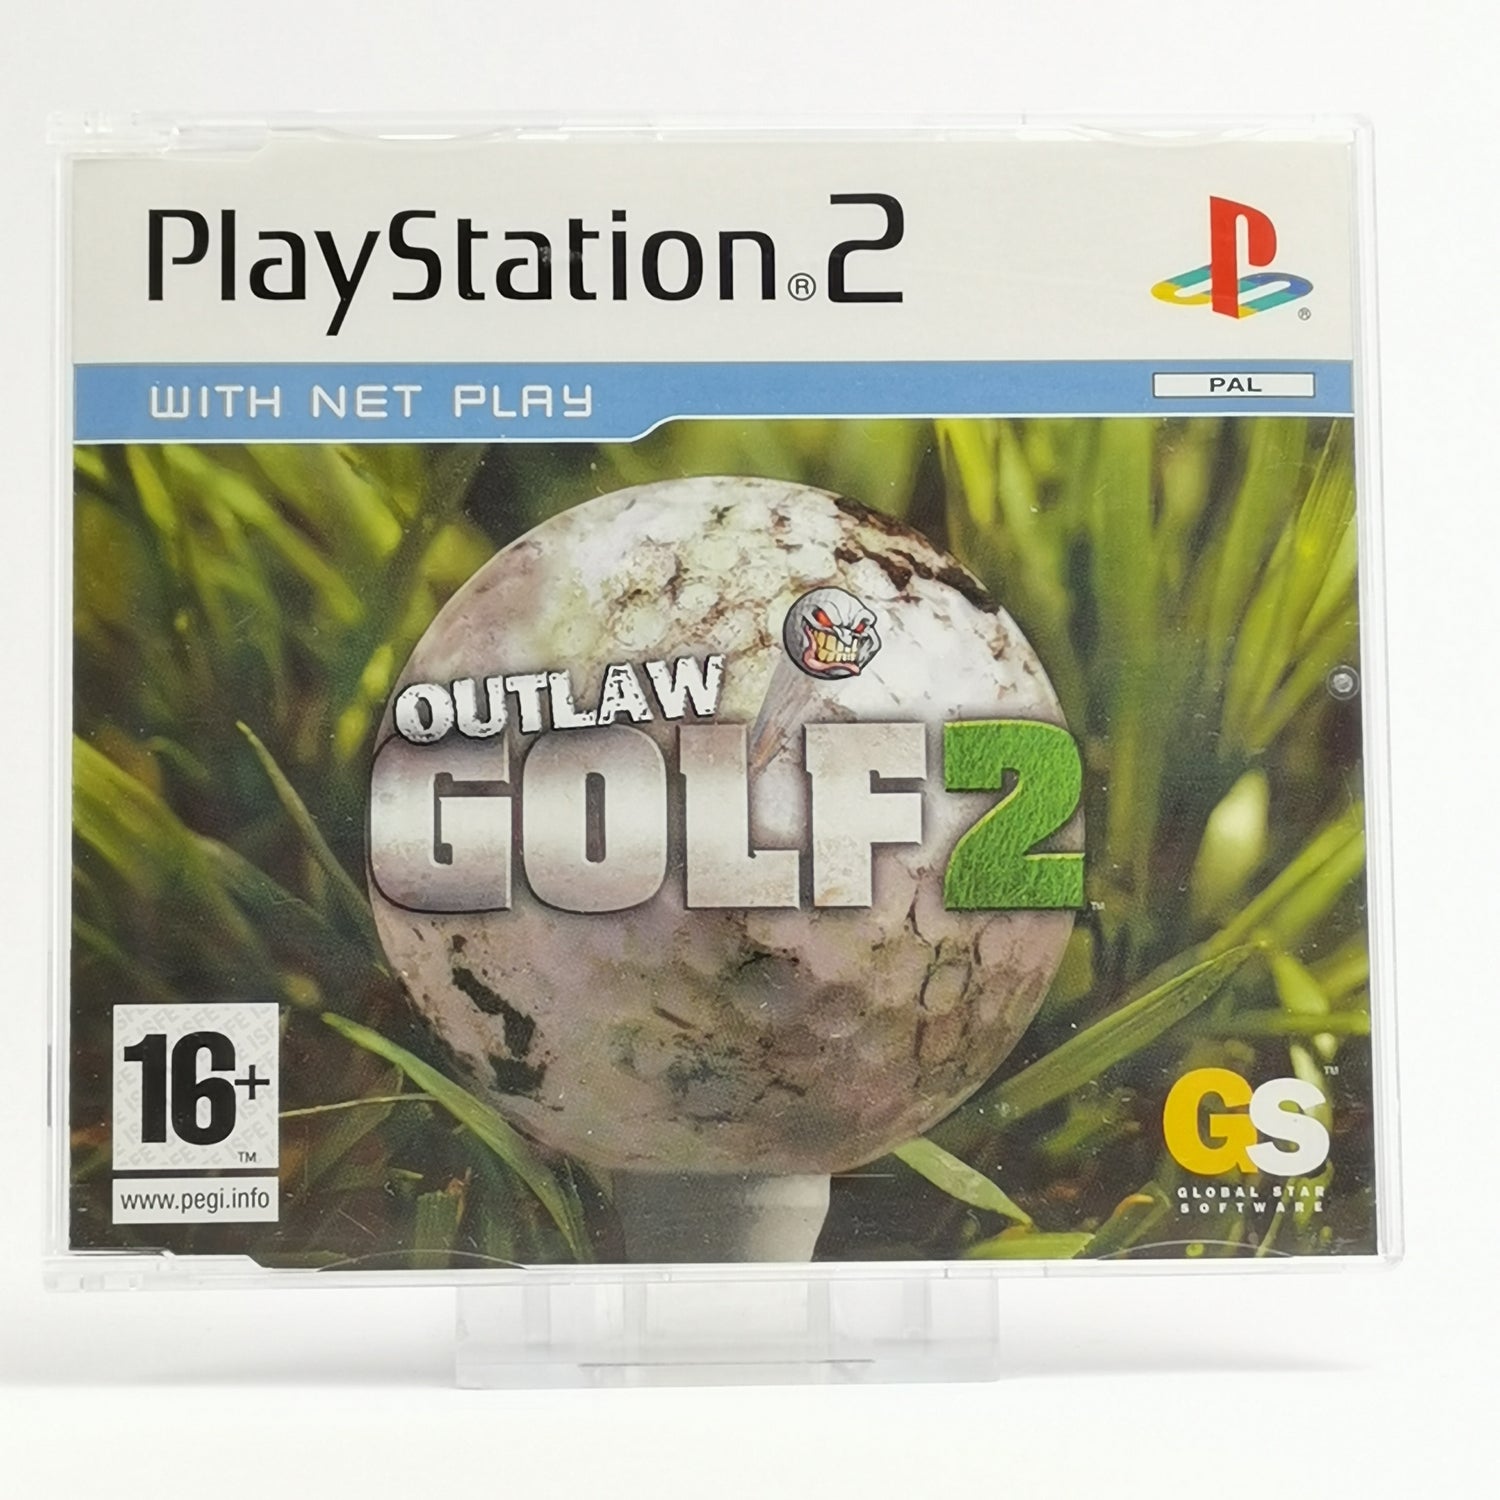 Sony Playstation 2 Promo Game: Outlaw Golf 2 - Full Version | PS2 OVP PAL